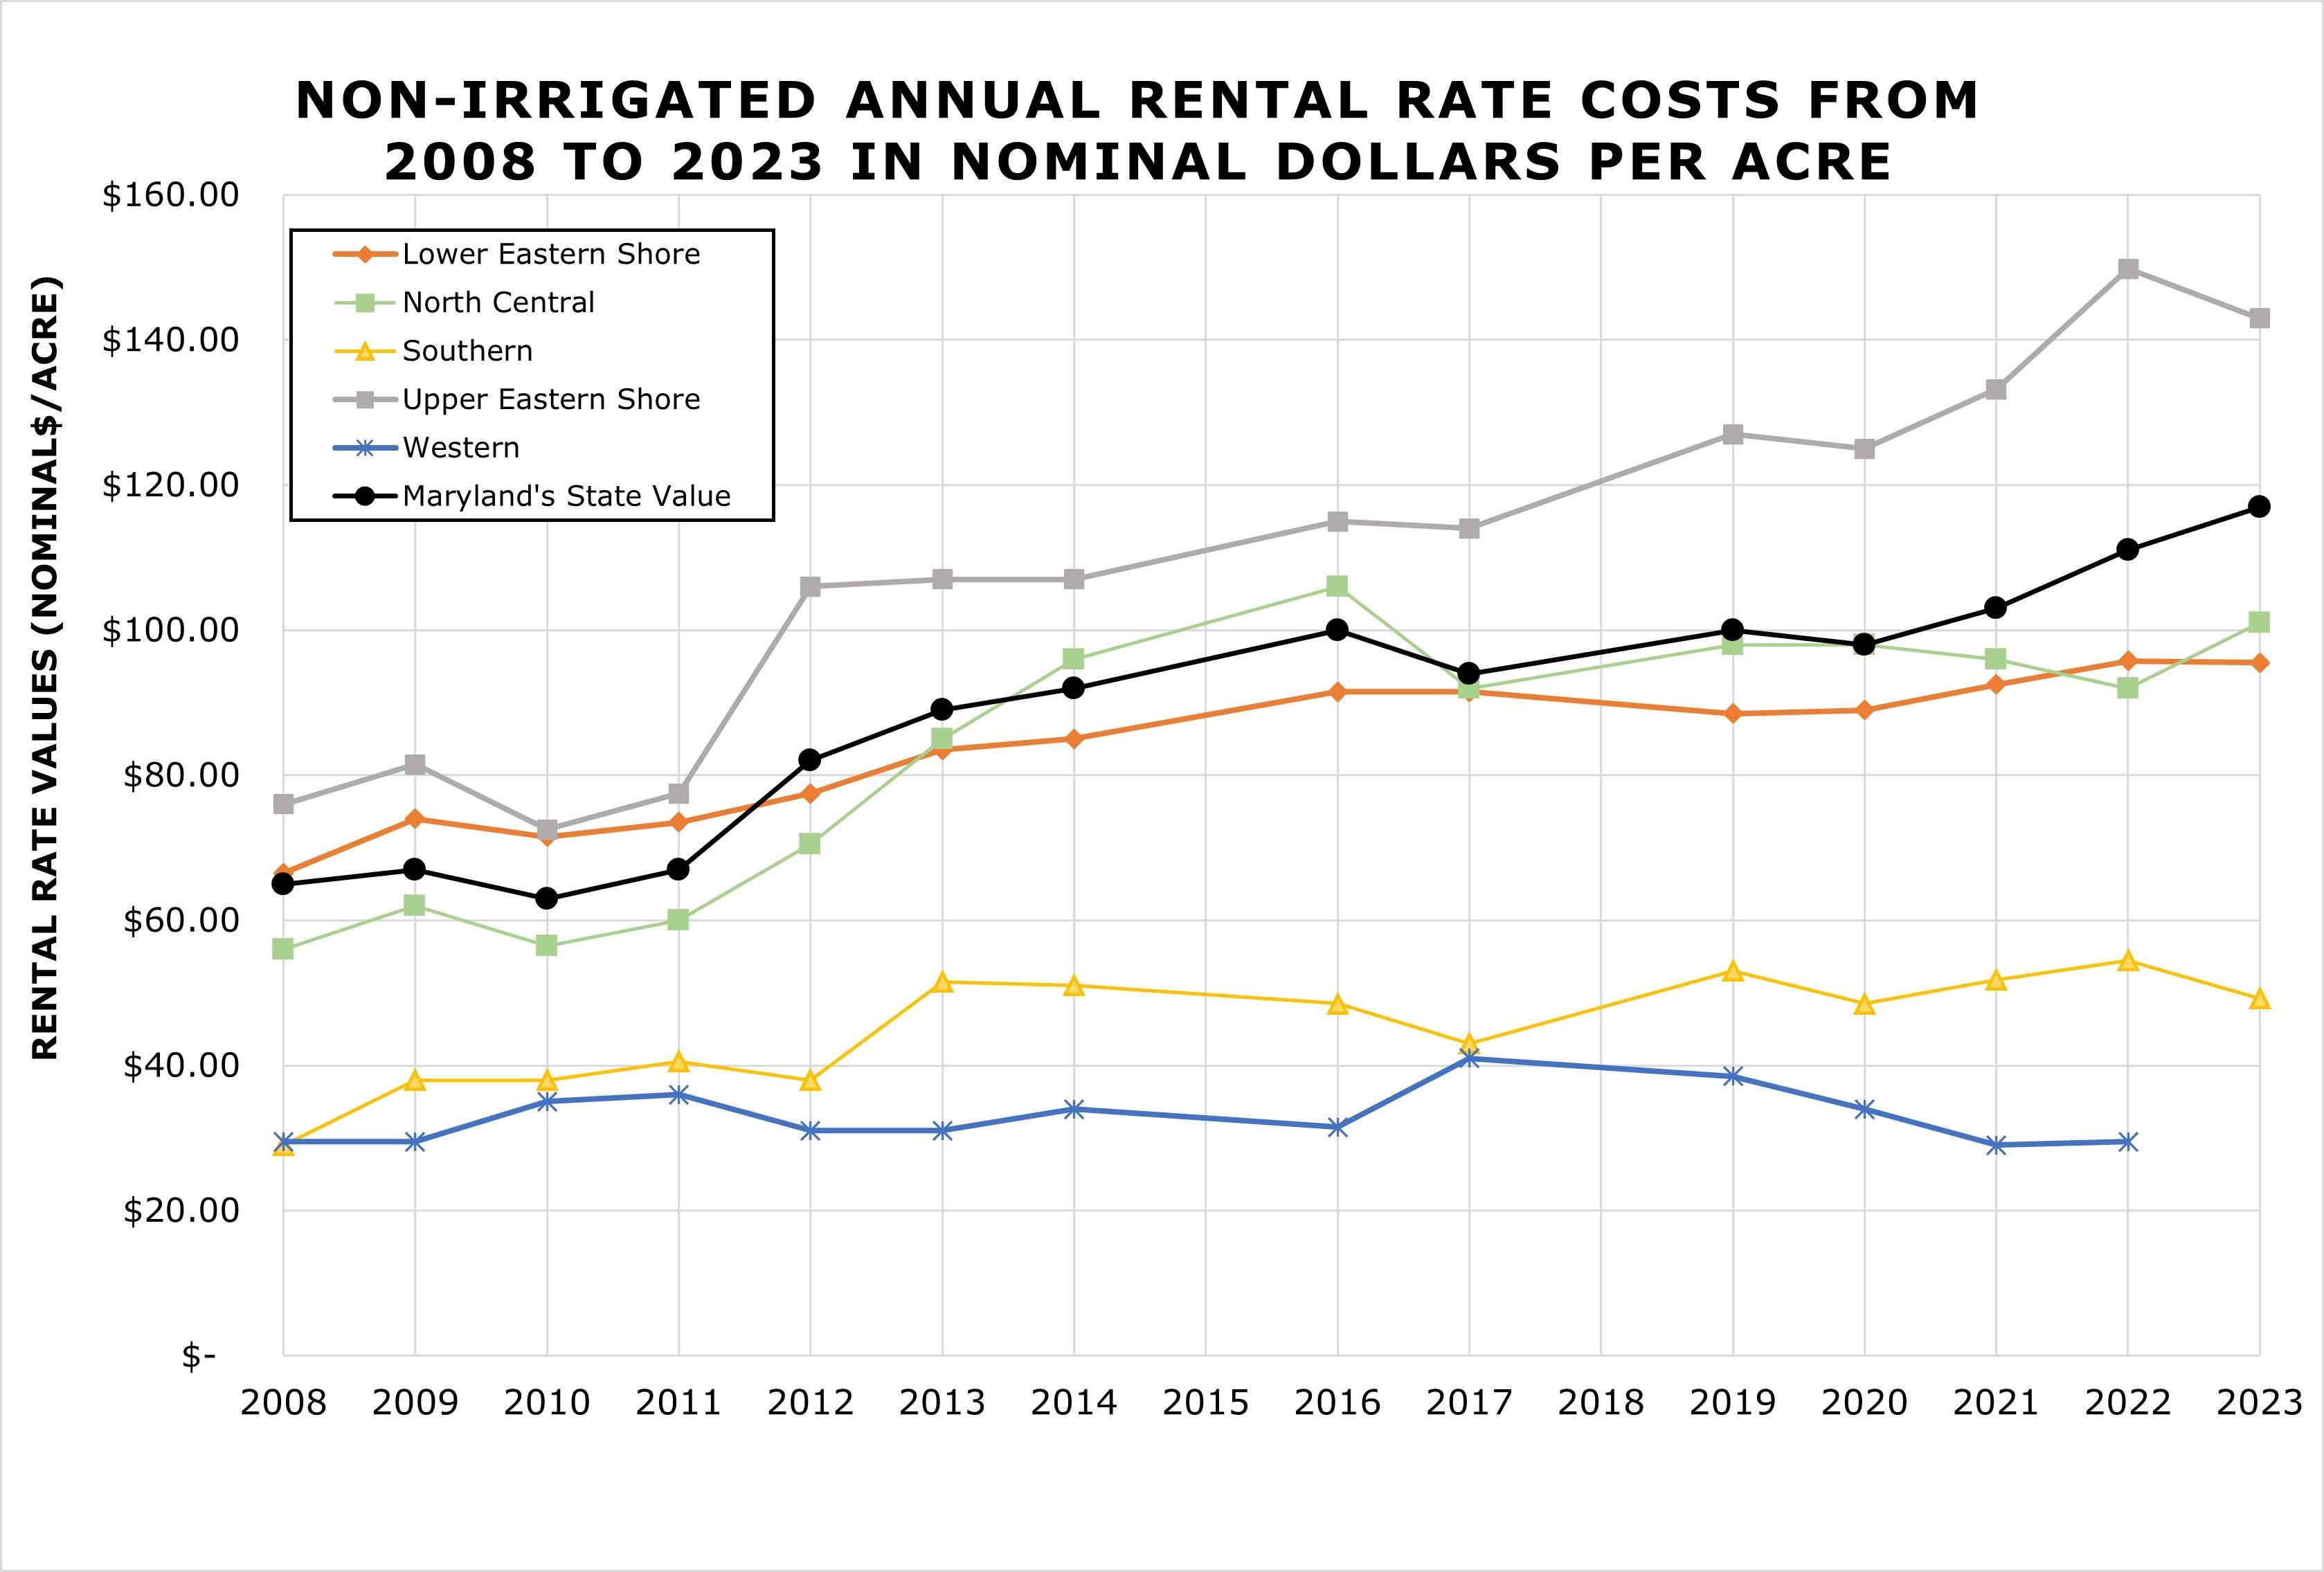 line graph showing Non-Irrigated Annual Rental Rate Costs from 2008 to 2023 in Nominal Dollars Per Acre